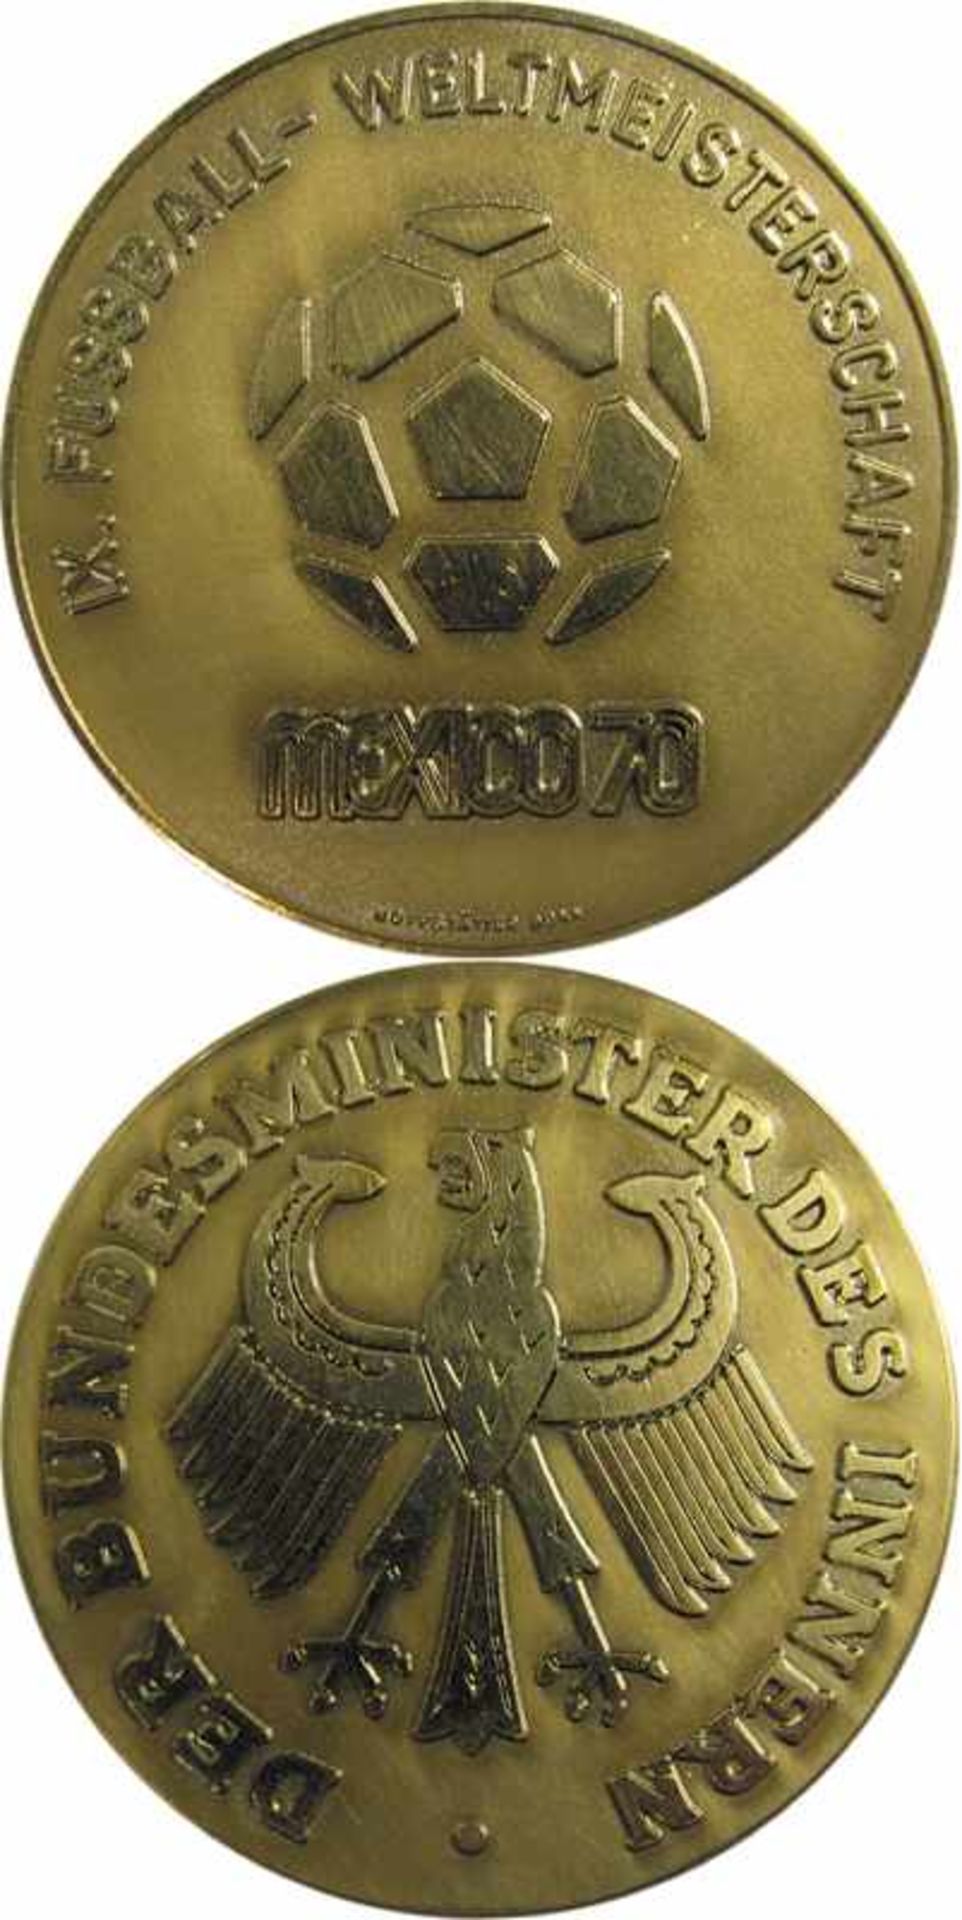 World Cup 1970 German Medal of Honour - Medal of honour from the Secretary of the Interior/Home